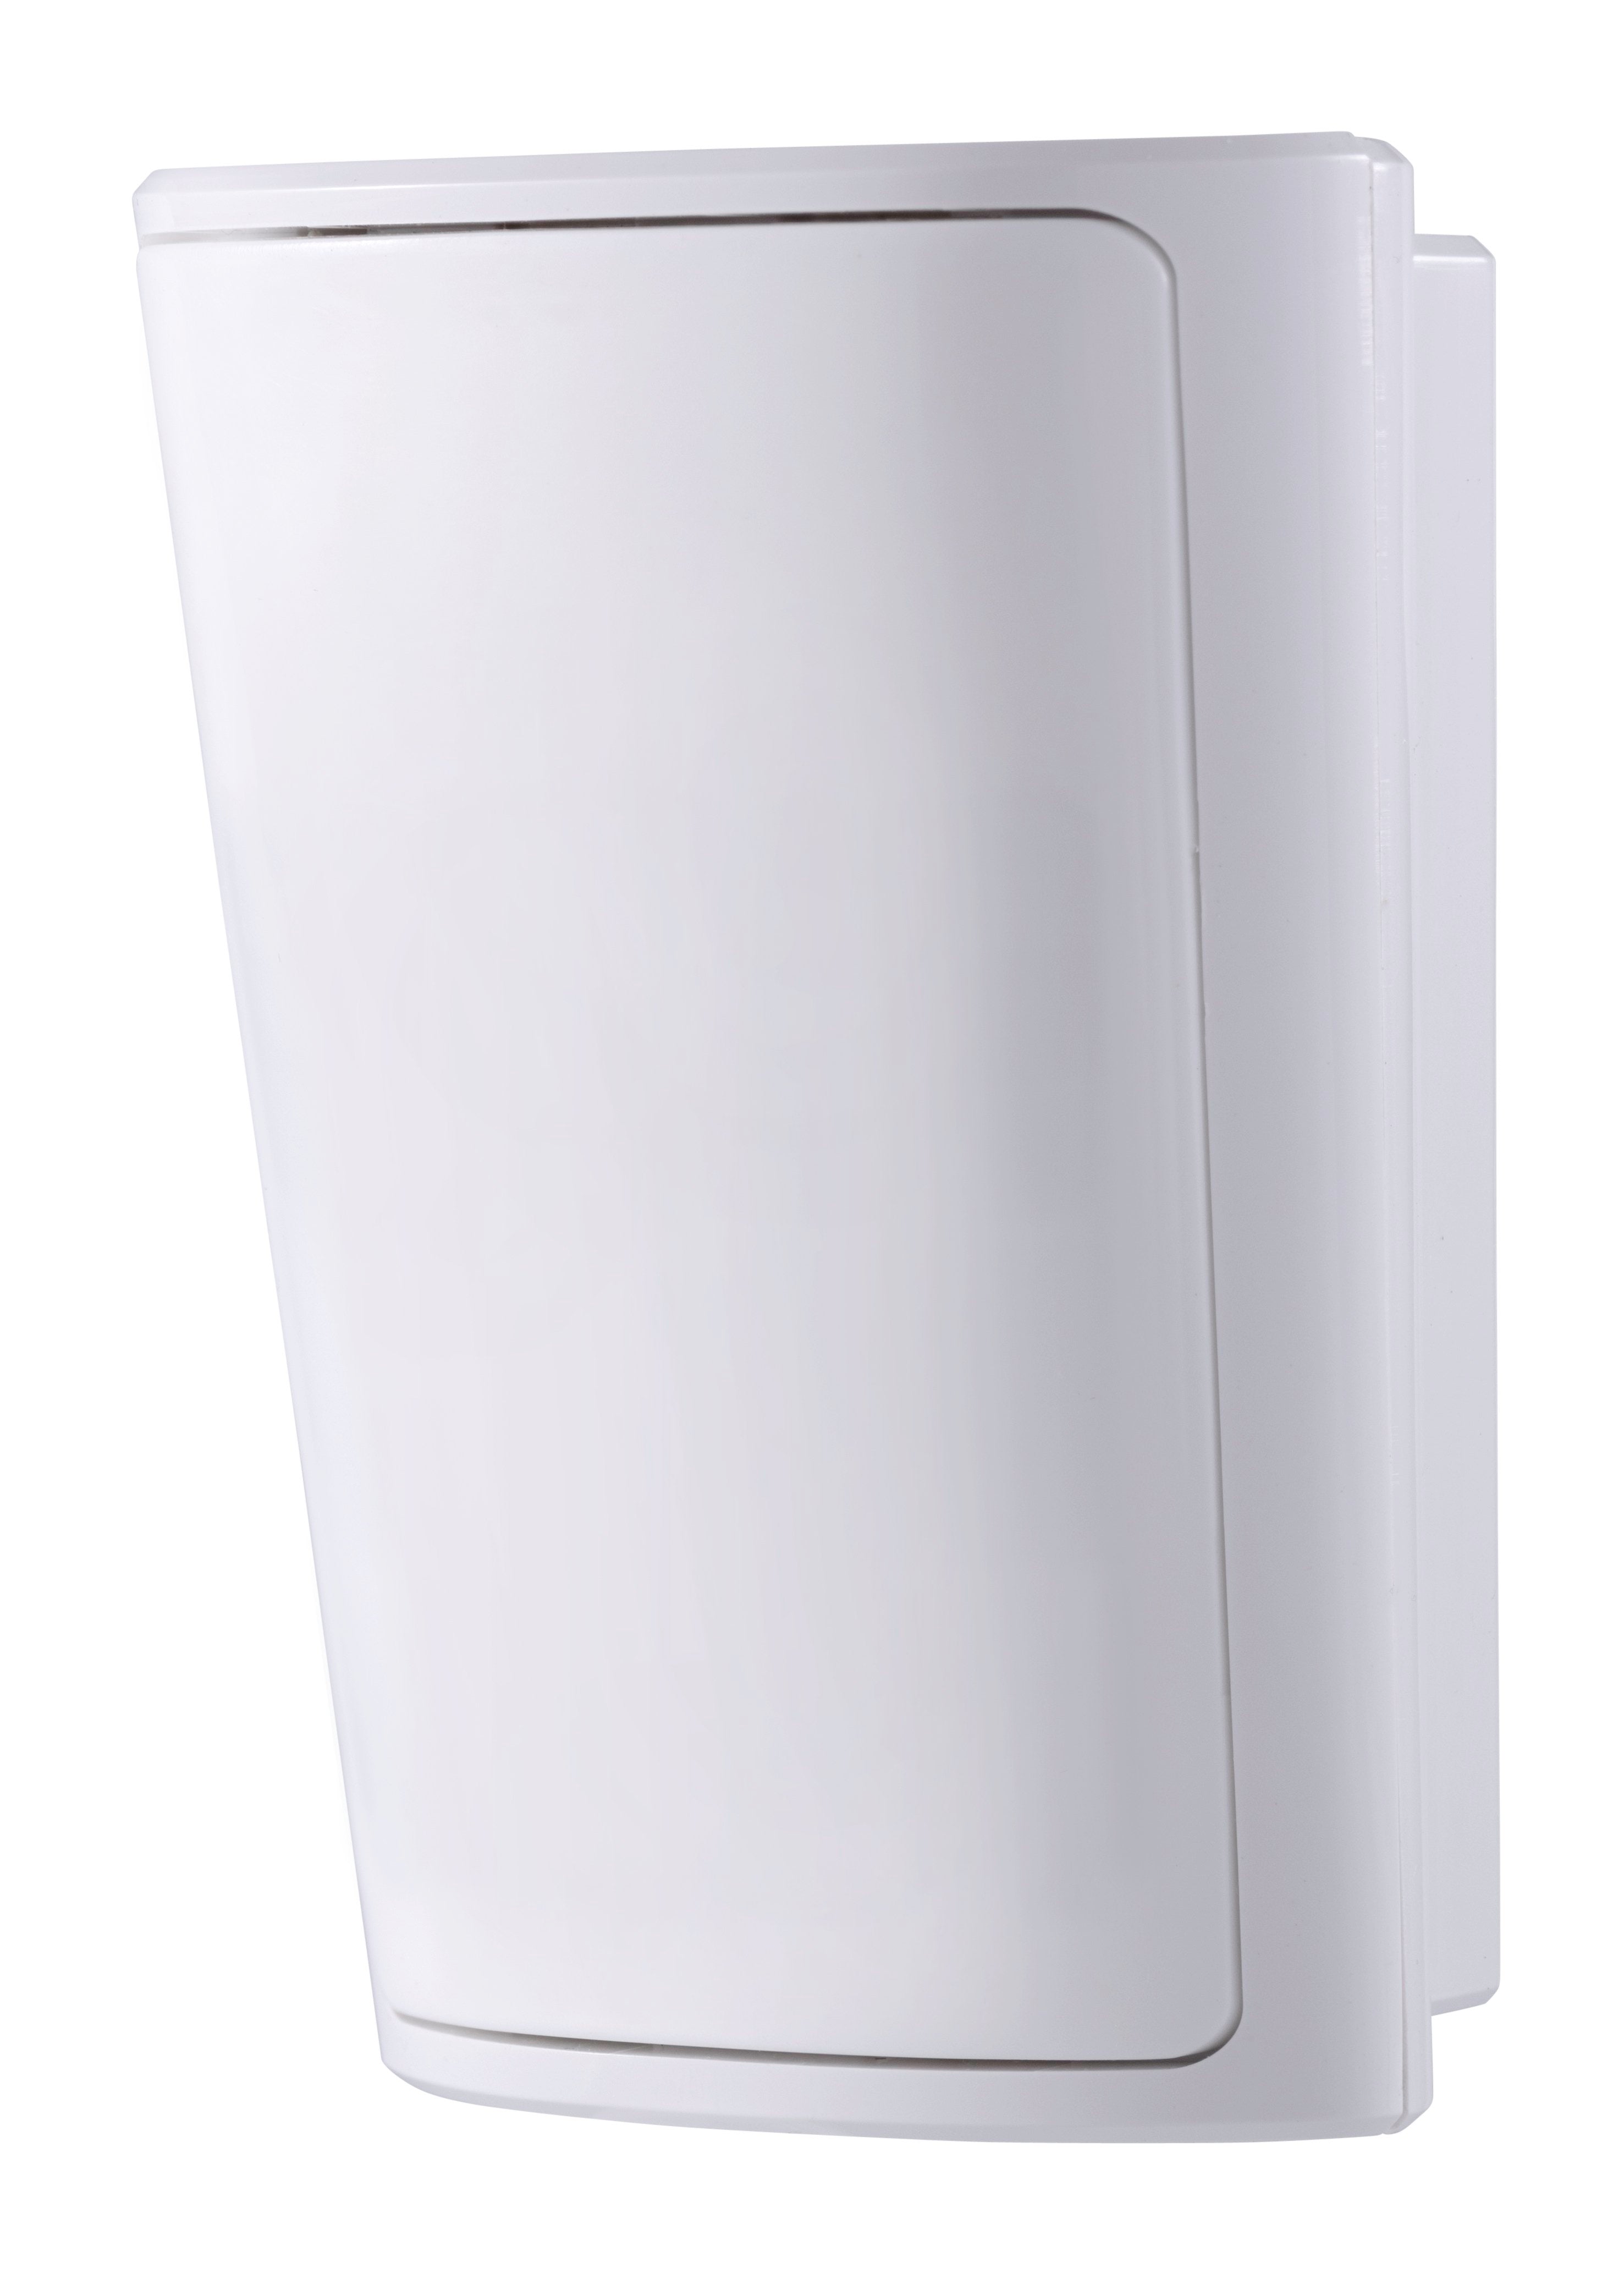 DSC Power-G Wireless PIR Motion Detector with PET Immunity (up to 38KGS) and Range 12x12M @2.1M Height